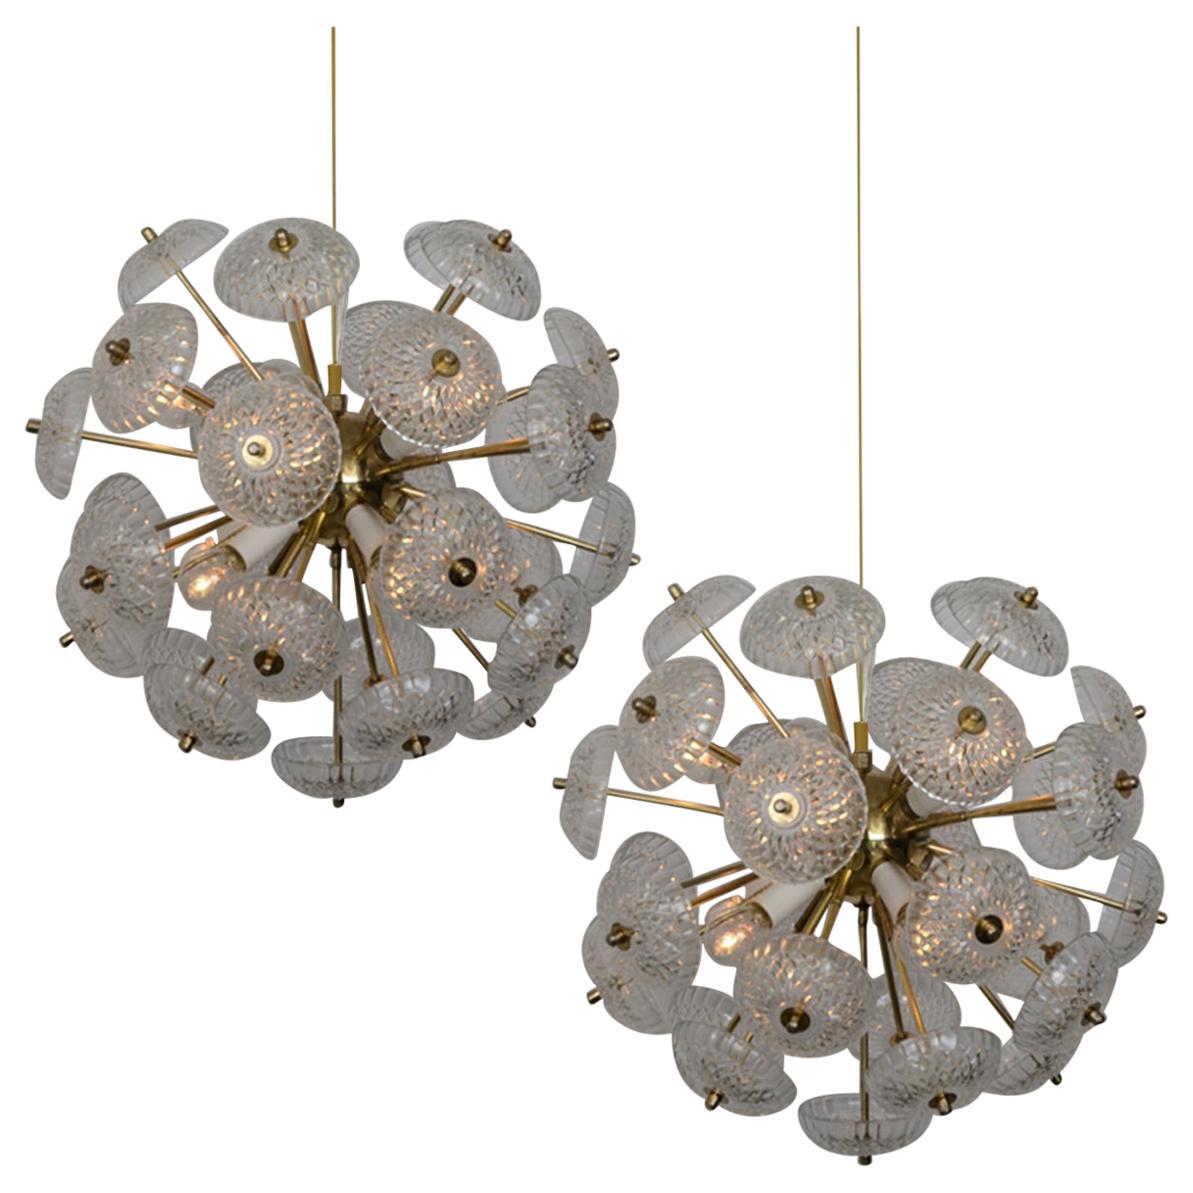 One of the three pairs stunning large brass chandeliers in the style of Emil Stejnar. Manufactured in the 1960s.
Very heavy made of brass with stylish glass disc glass light diffuses. The glass pieces are beautifully cut with a fine eye for detail,